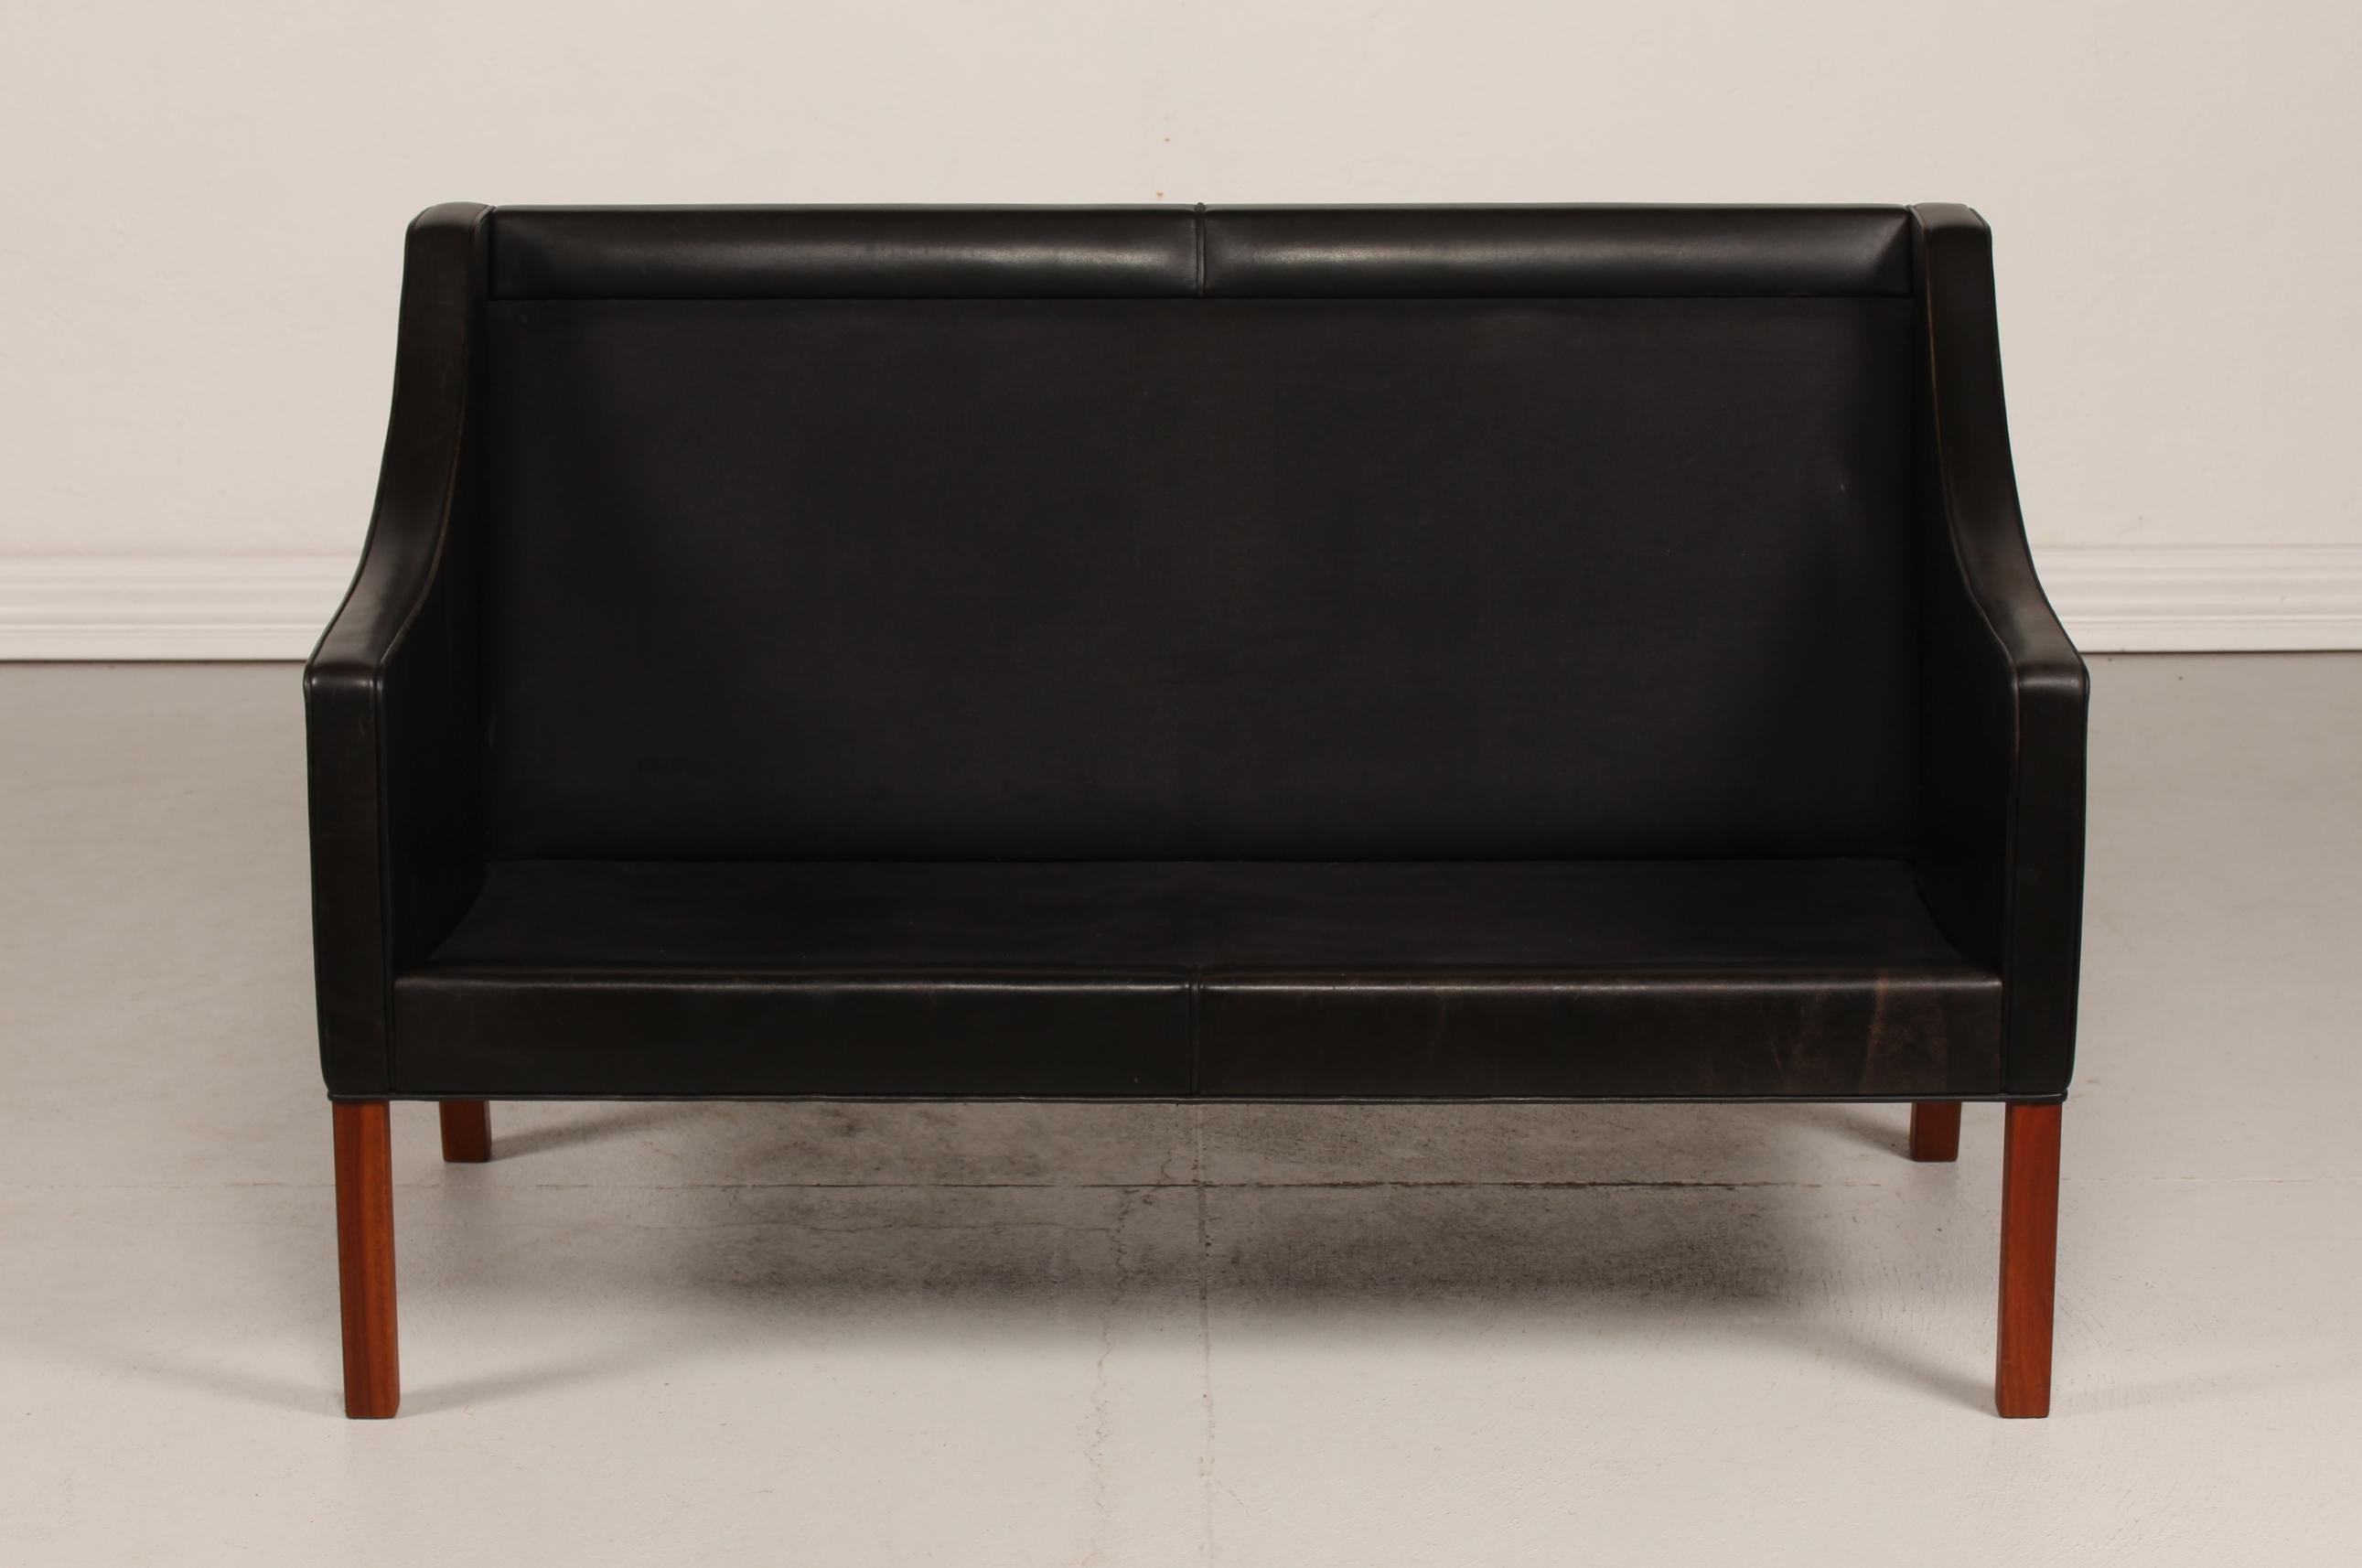 Børge Mogensen Sofa 2208 with Black Leather by Fredericia Furniture, Denmark For Sale 2